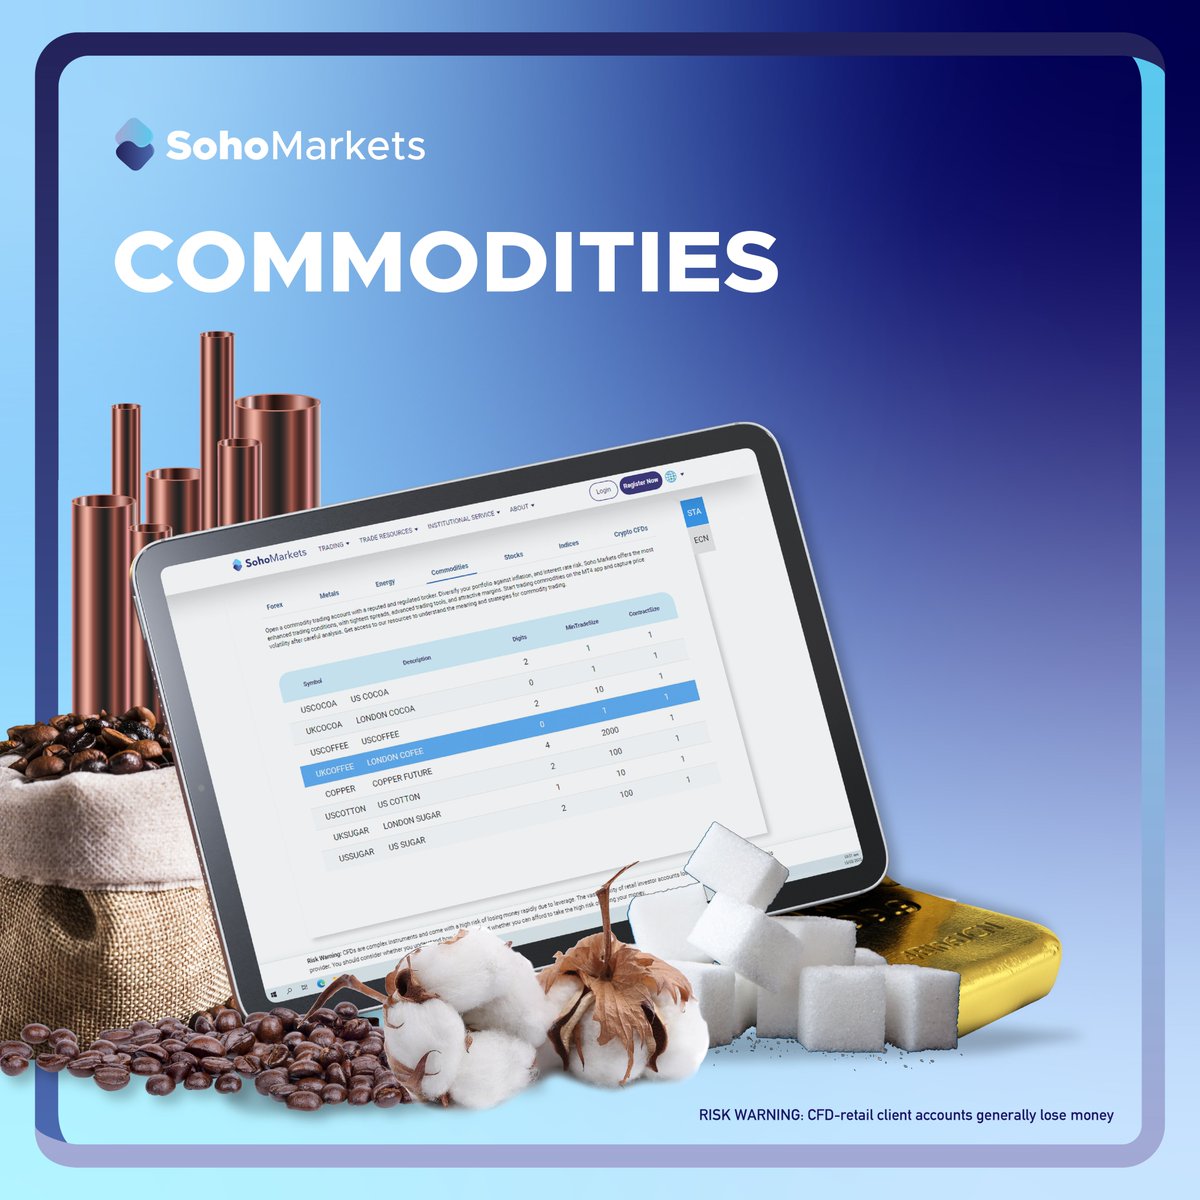 Commodities are materials or goods that used in human activity – such as oil, sugar, precious metals.
Trade with Sohomarkets a wide range of commodities like USCOCOA, UKCOFFEE, USCOTTON and many more. 
🟥Find out more about us at▶️𝐡𝐭𝐭𝐩𝐬://𝐰𝐰𝐰.𝐬𝐨𝐡𝐨𝐦𝐚𝐫𝐤𝐞𝐭𝐬.𝐞𝐮